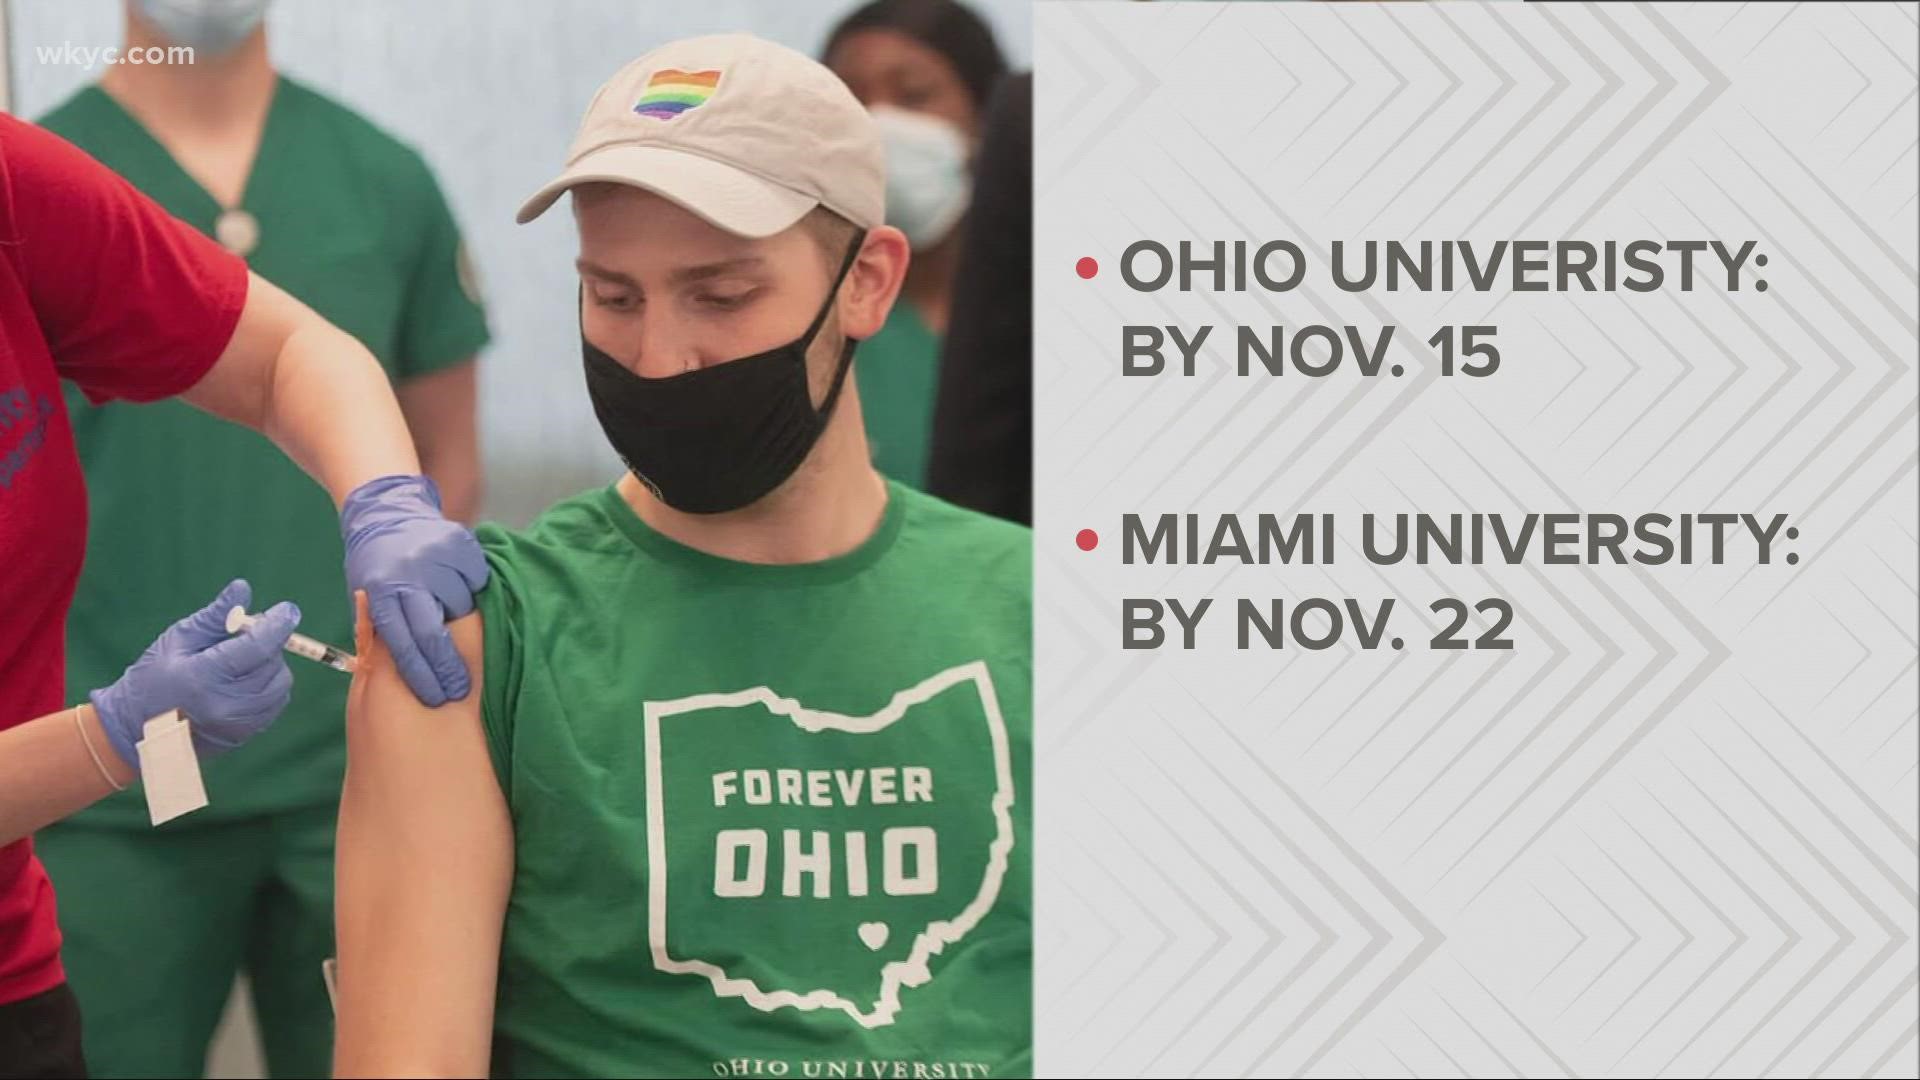 On Tuesday, Ohio University, Miami University, and the University of Cincinatti each announced vaccine mandates for students.